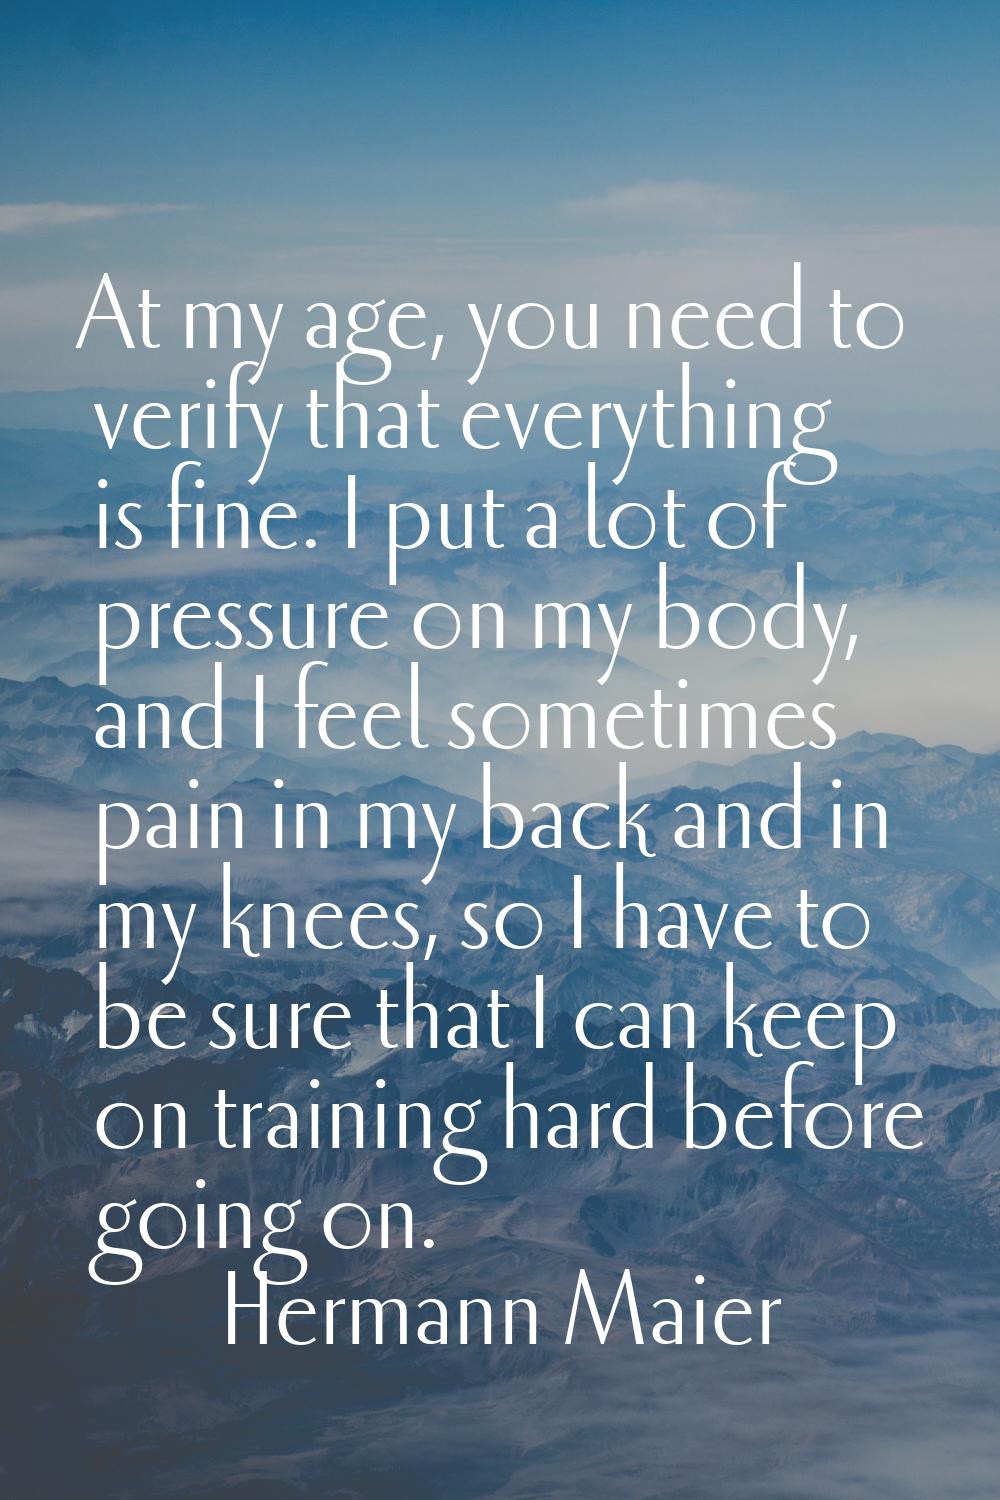 At my age, you need to verify that everything is fine. I put a lot of pressure on my body, and I fe